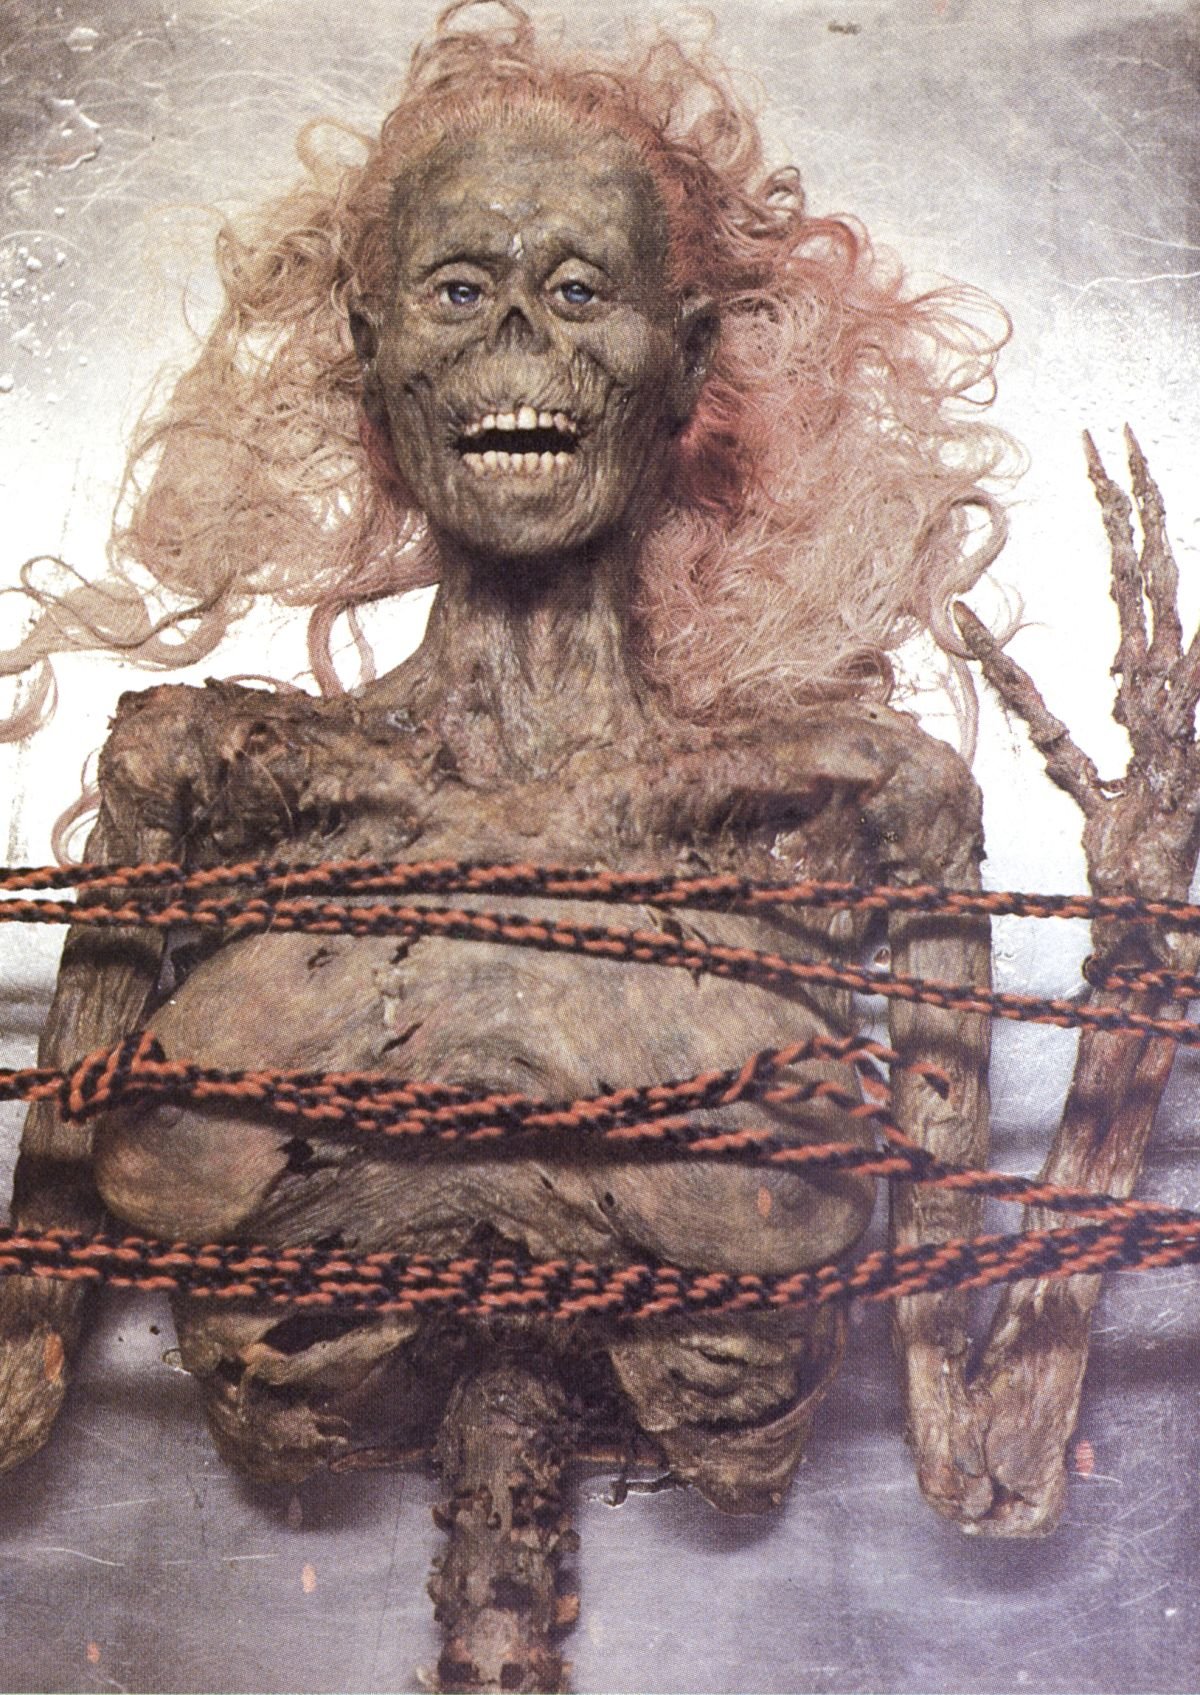 The “half-corpse” used in the film.